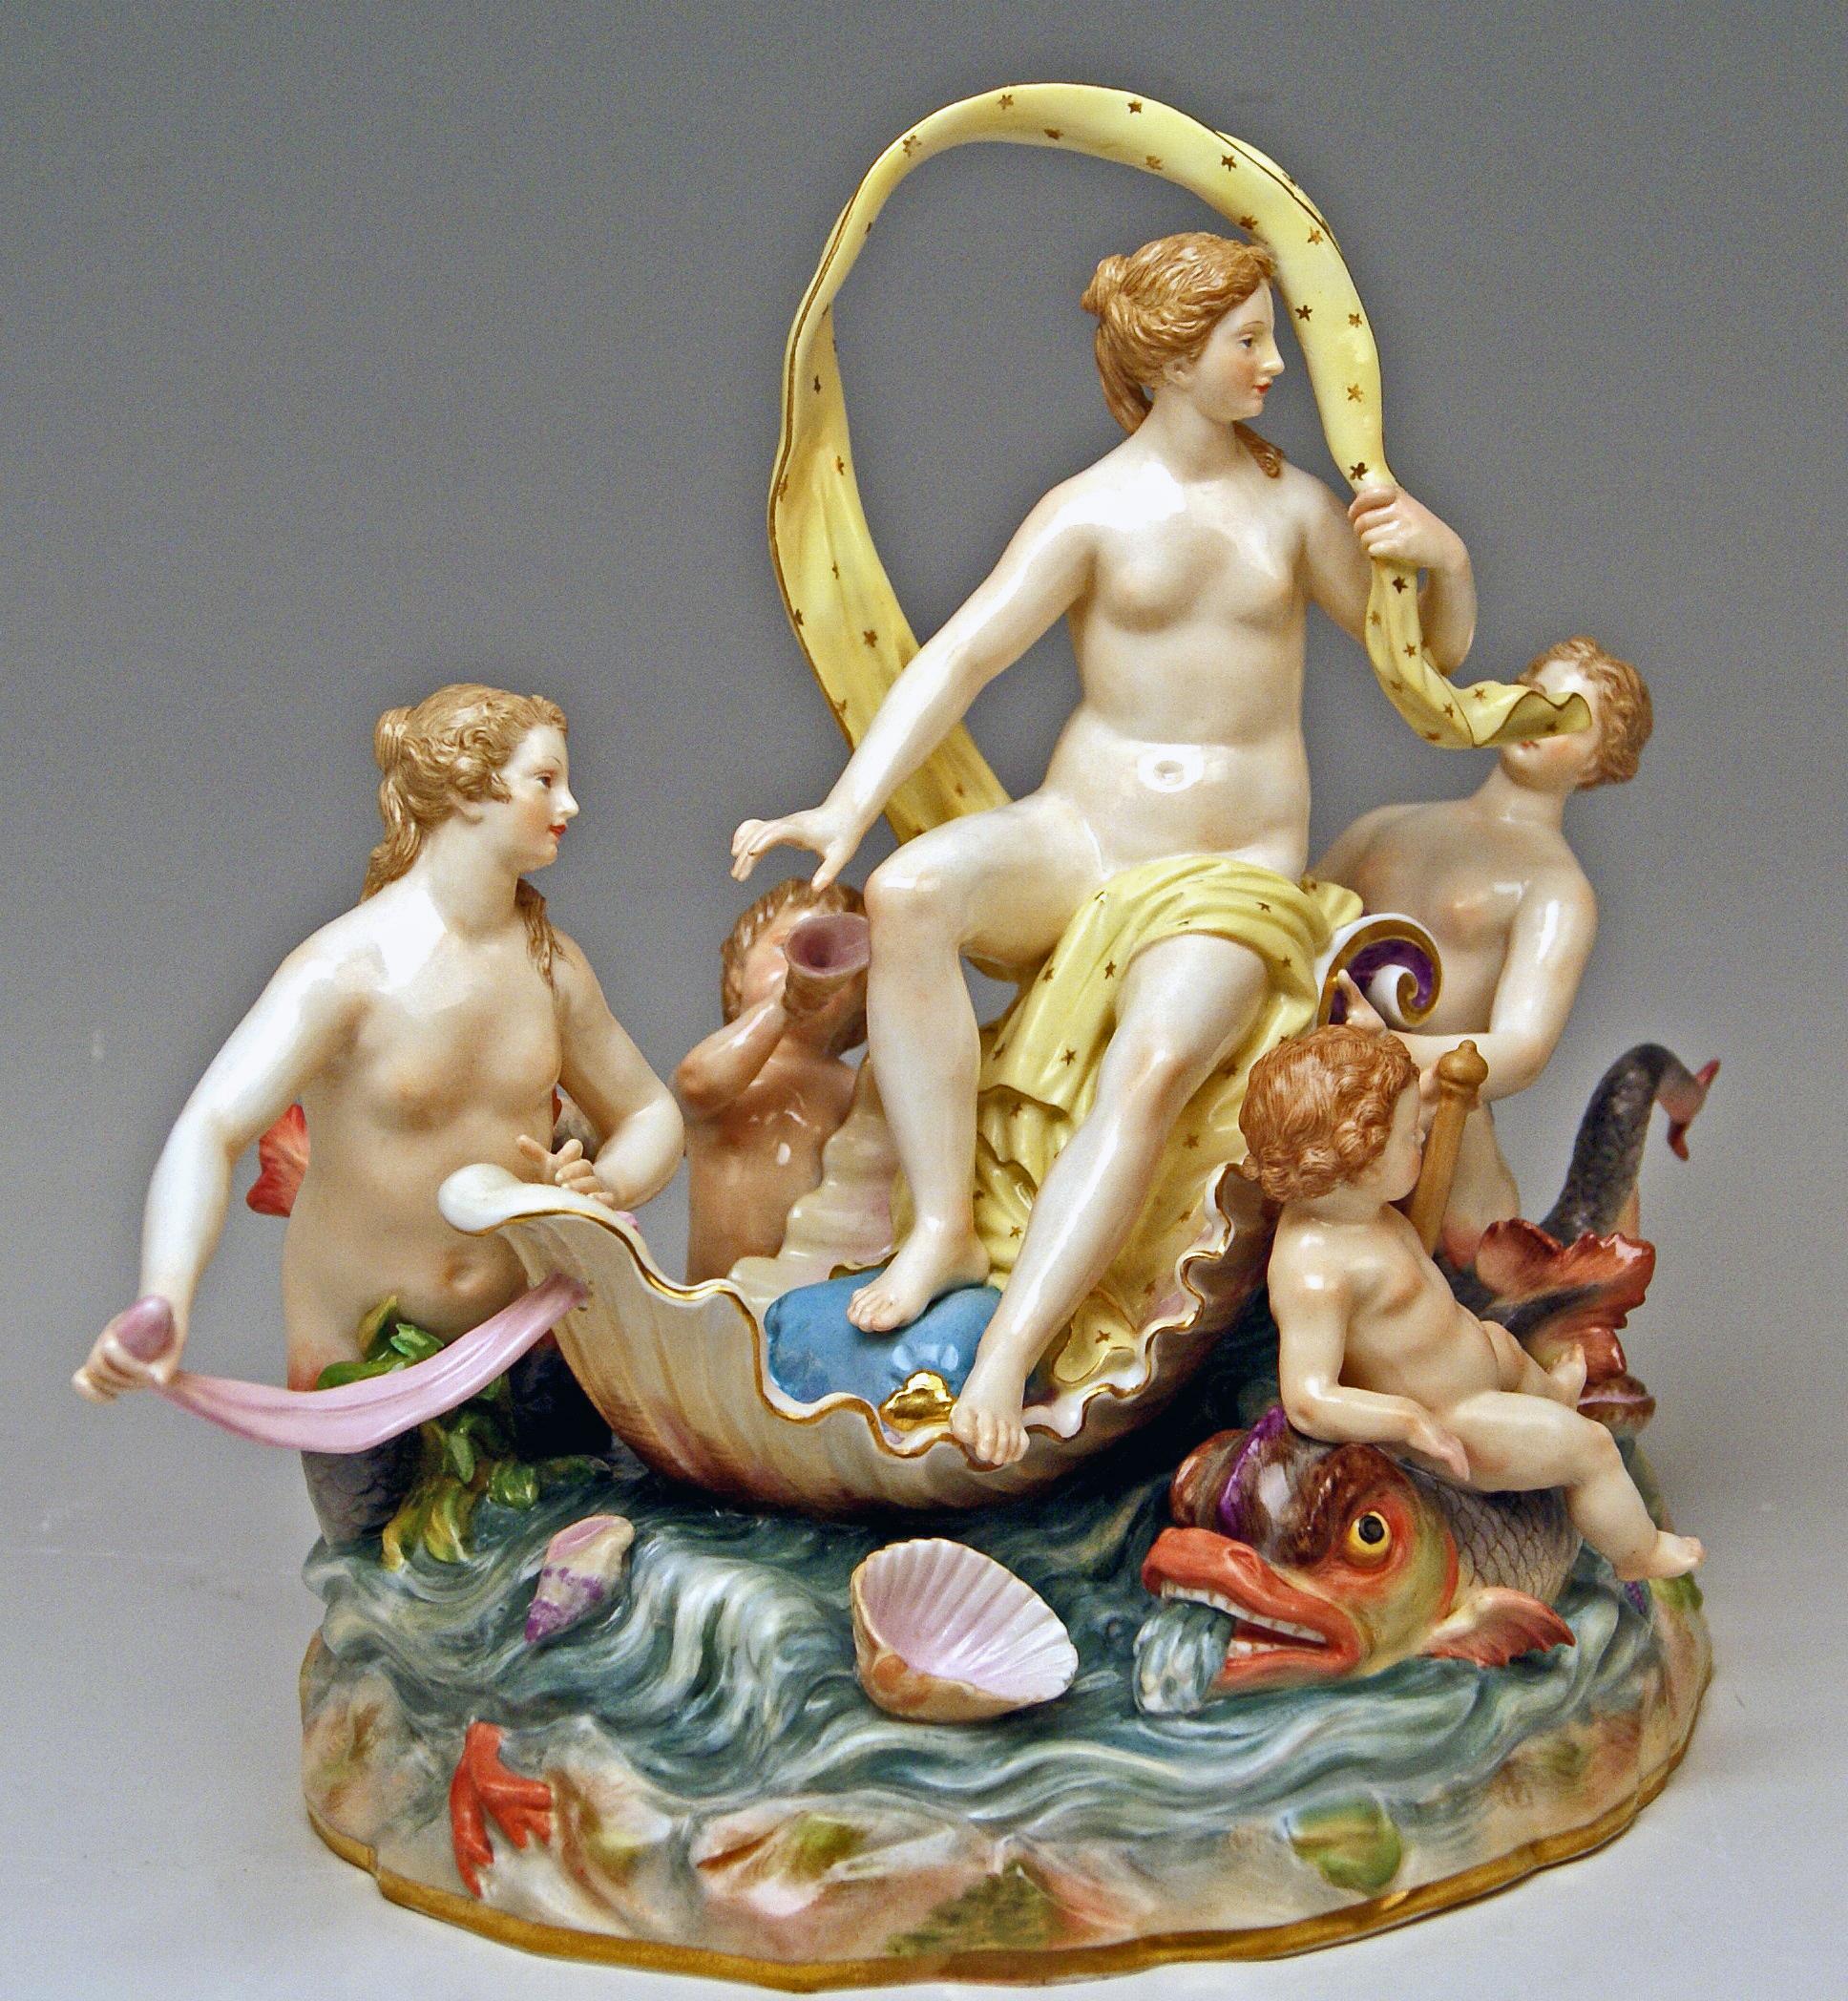 Meissen gorgeous figurine: Figurine group allegory of water / series of four elements.
The details are stunningly sculptured = finest modelling

Manufactory: Meissen 
Dating: Made circa 1880
Hallmarked: Meissen Mark of fourth quarter of 19th